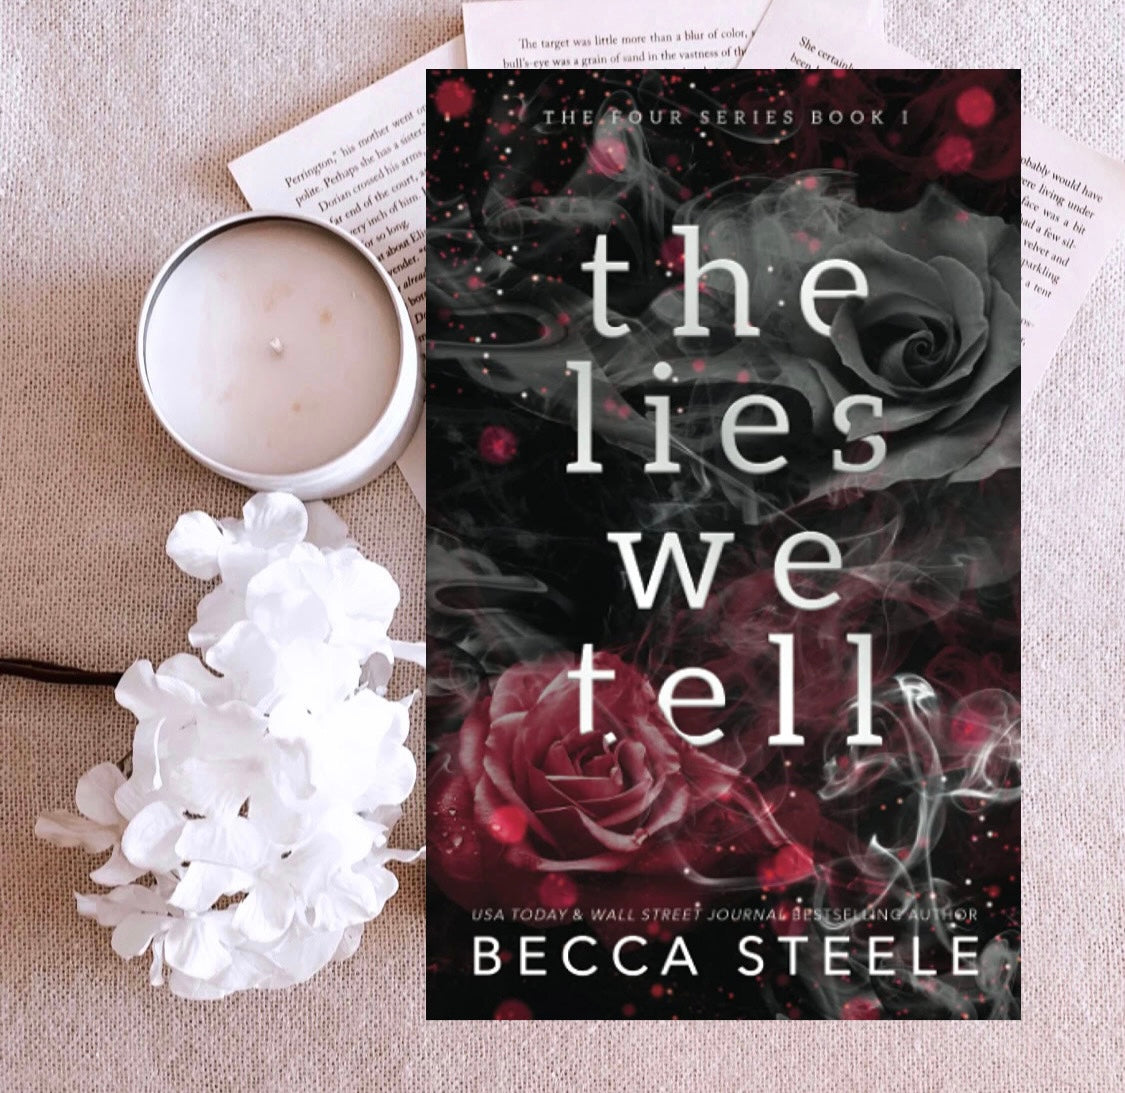 The Four series (Anniversary Editions) by Becca Steele